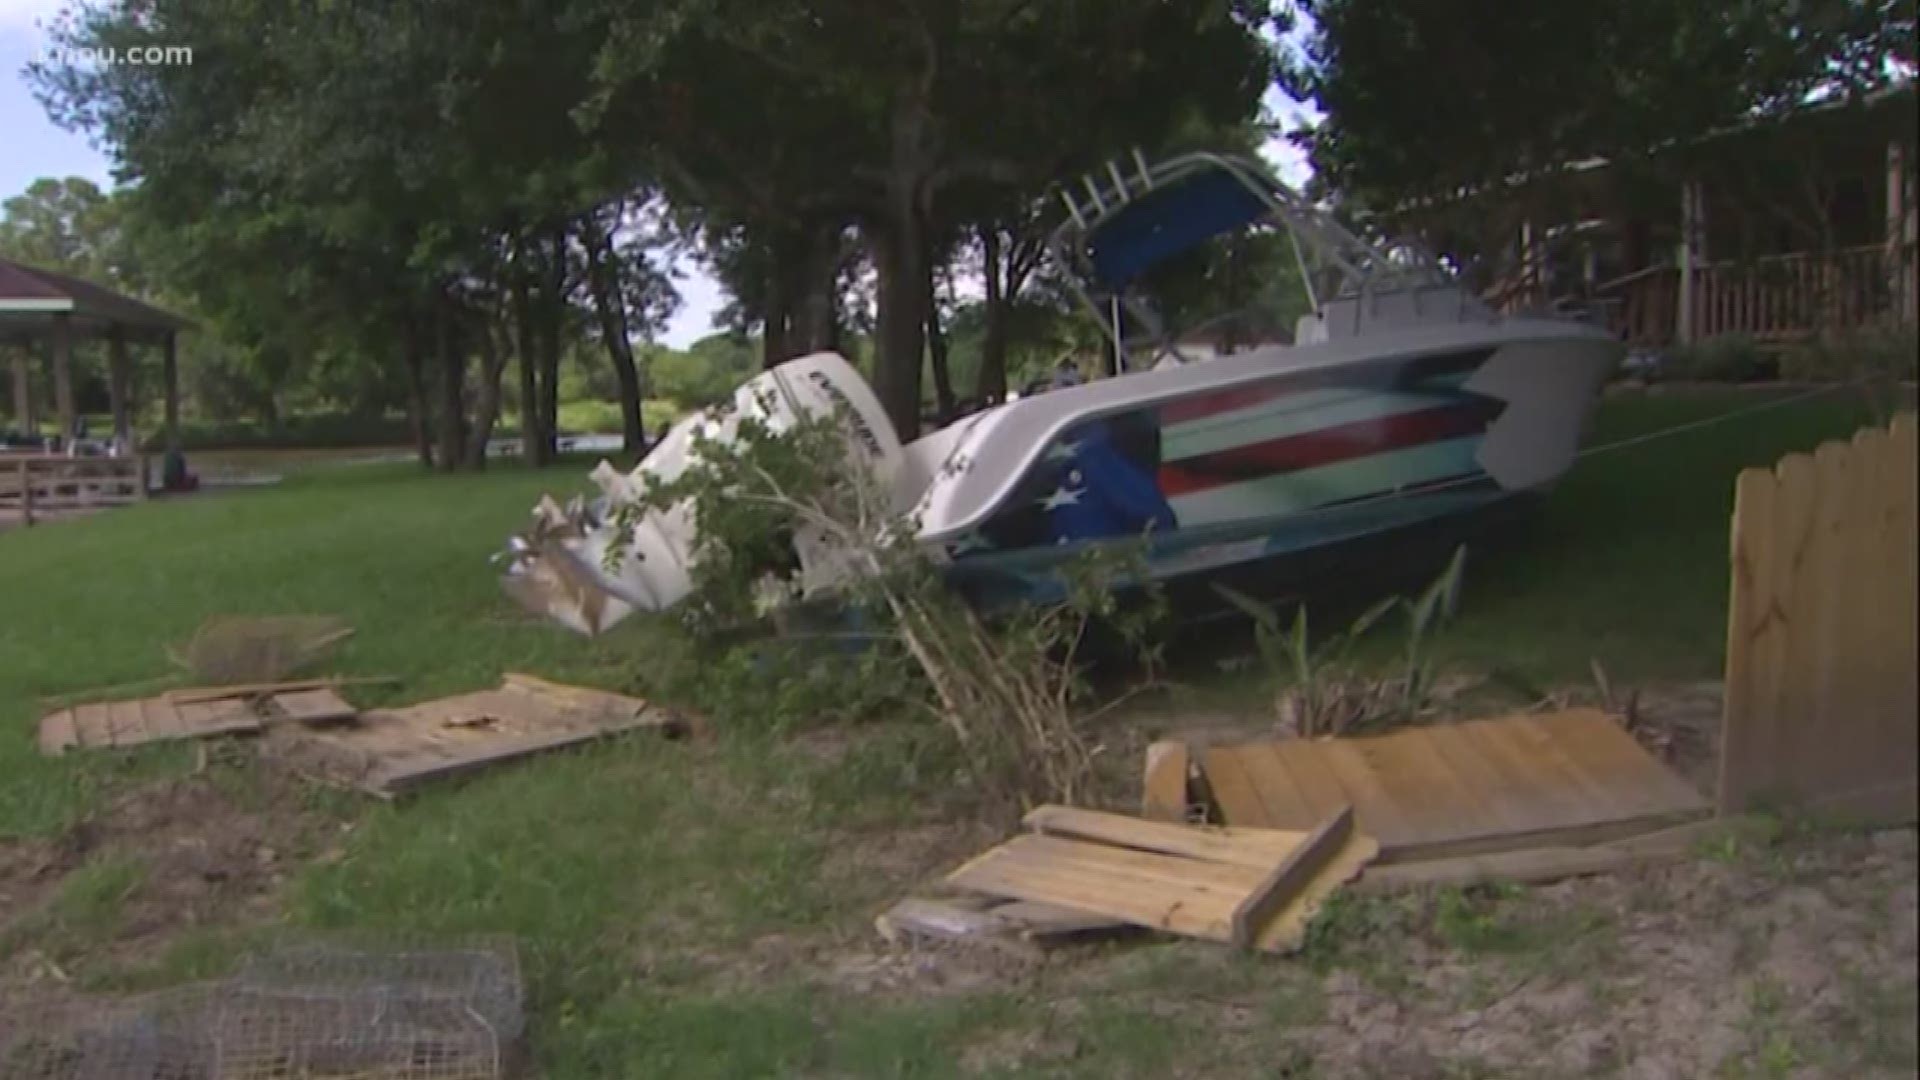 Boaters crashed through a dock, backyard fence and almost hit kids fishing, according to witnesses.